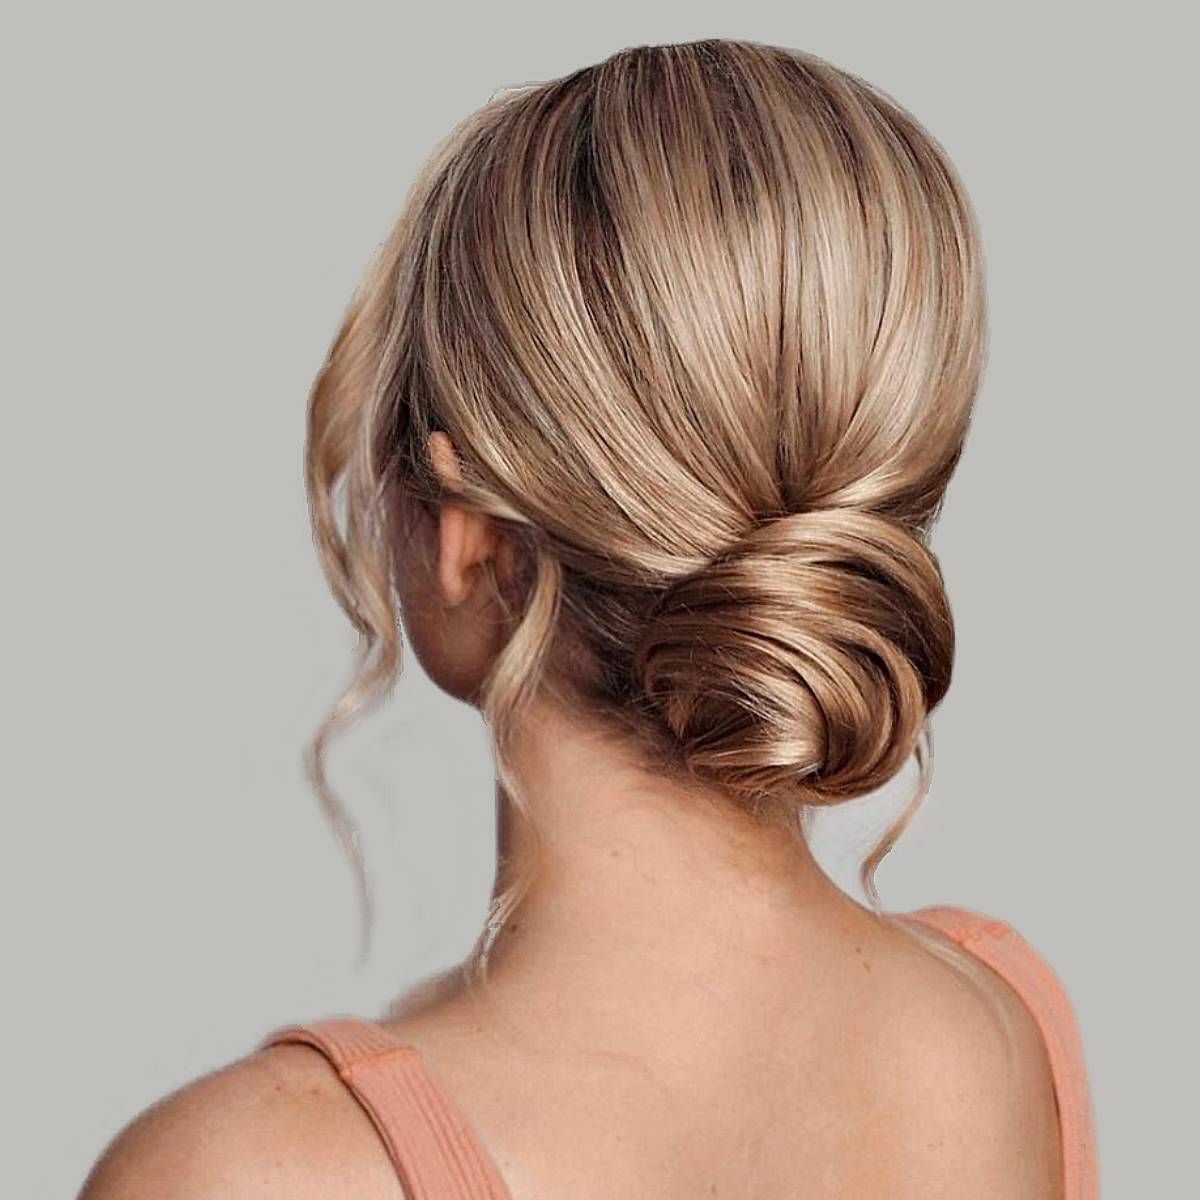 33 Super Easy Updos For Beginners To Try In 2023 For Easy Evening Upstyle (View 5 of 25)